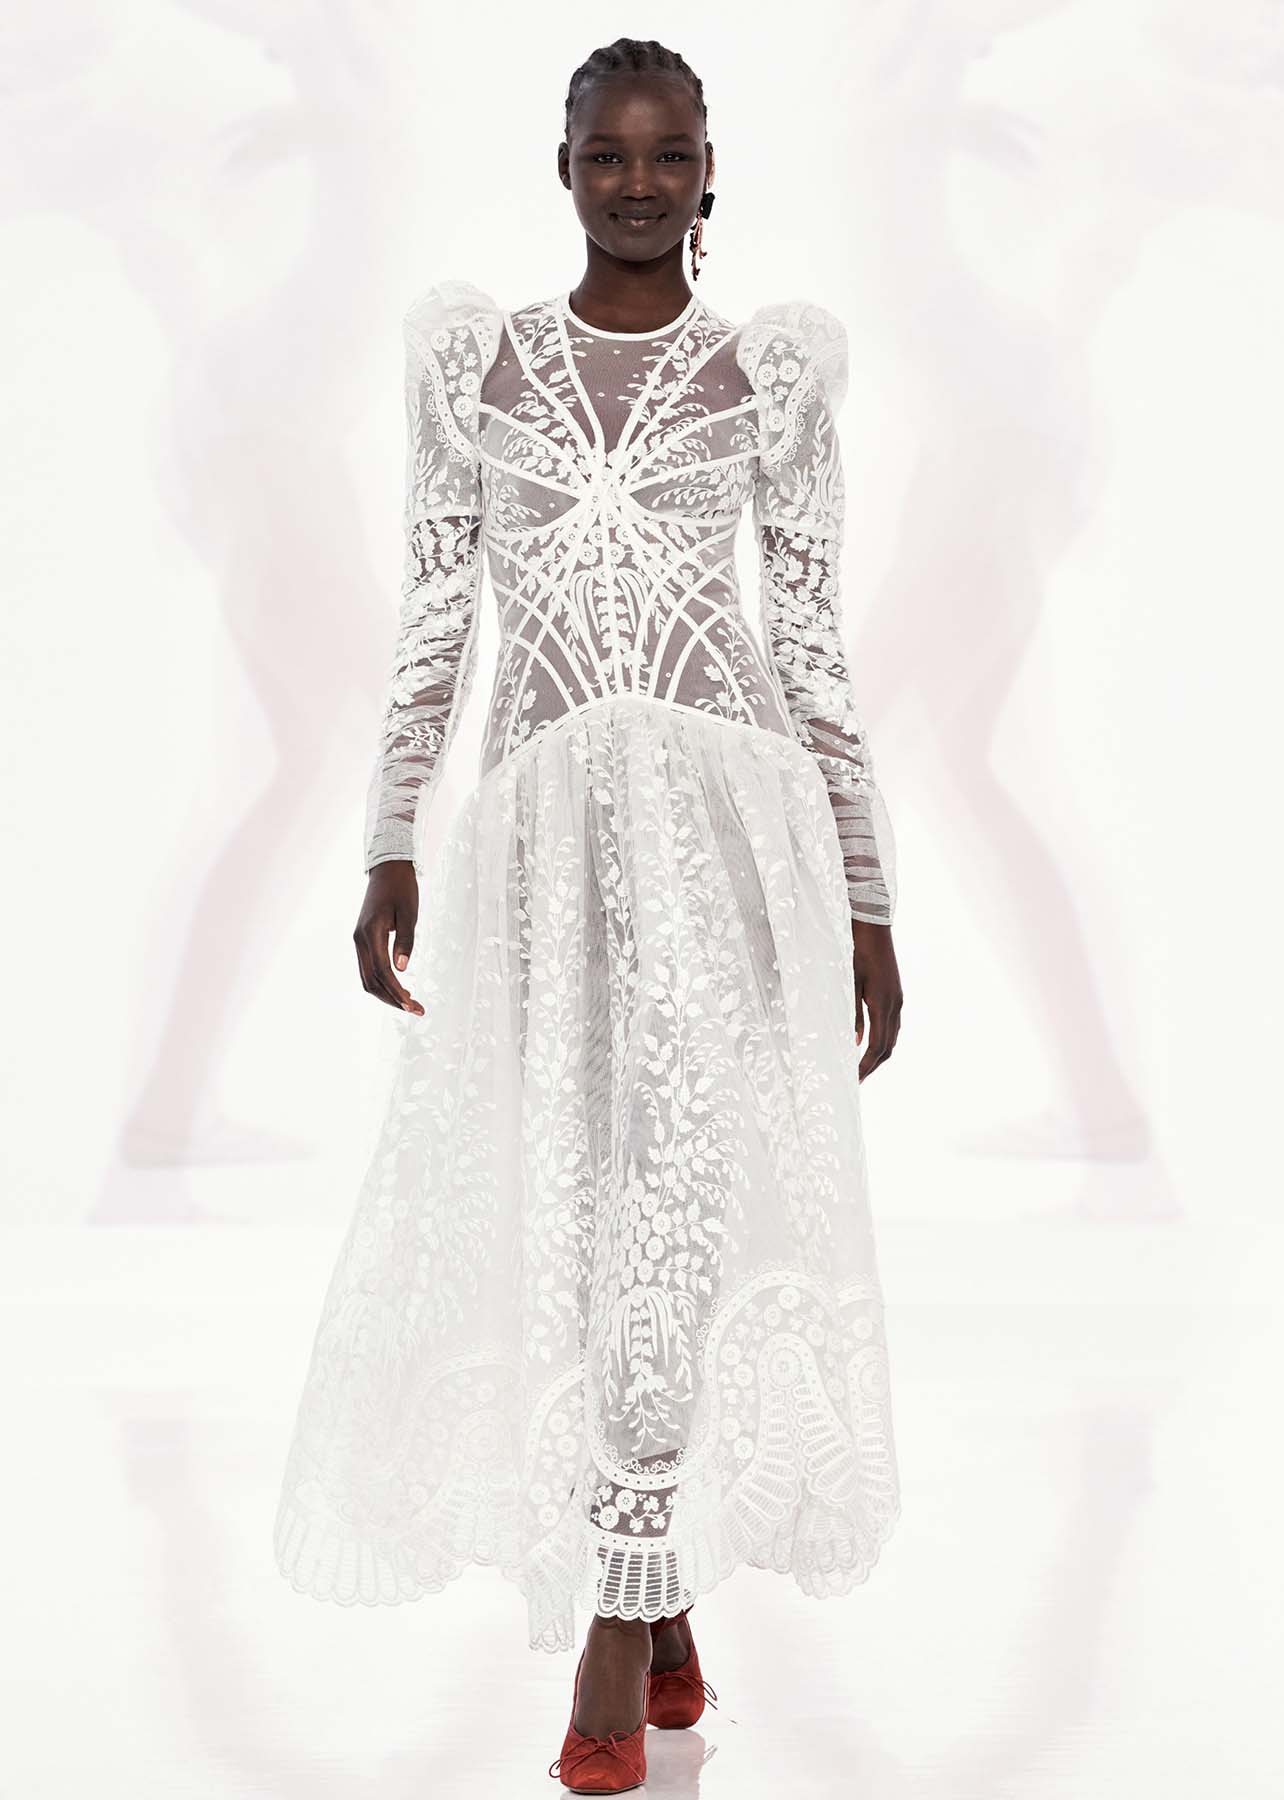 White lace floor length dress photographed on a model